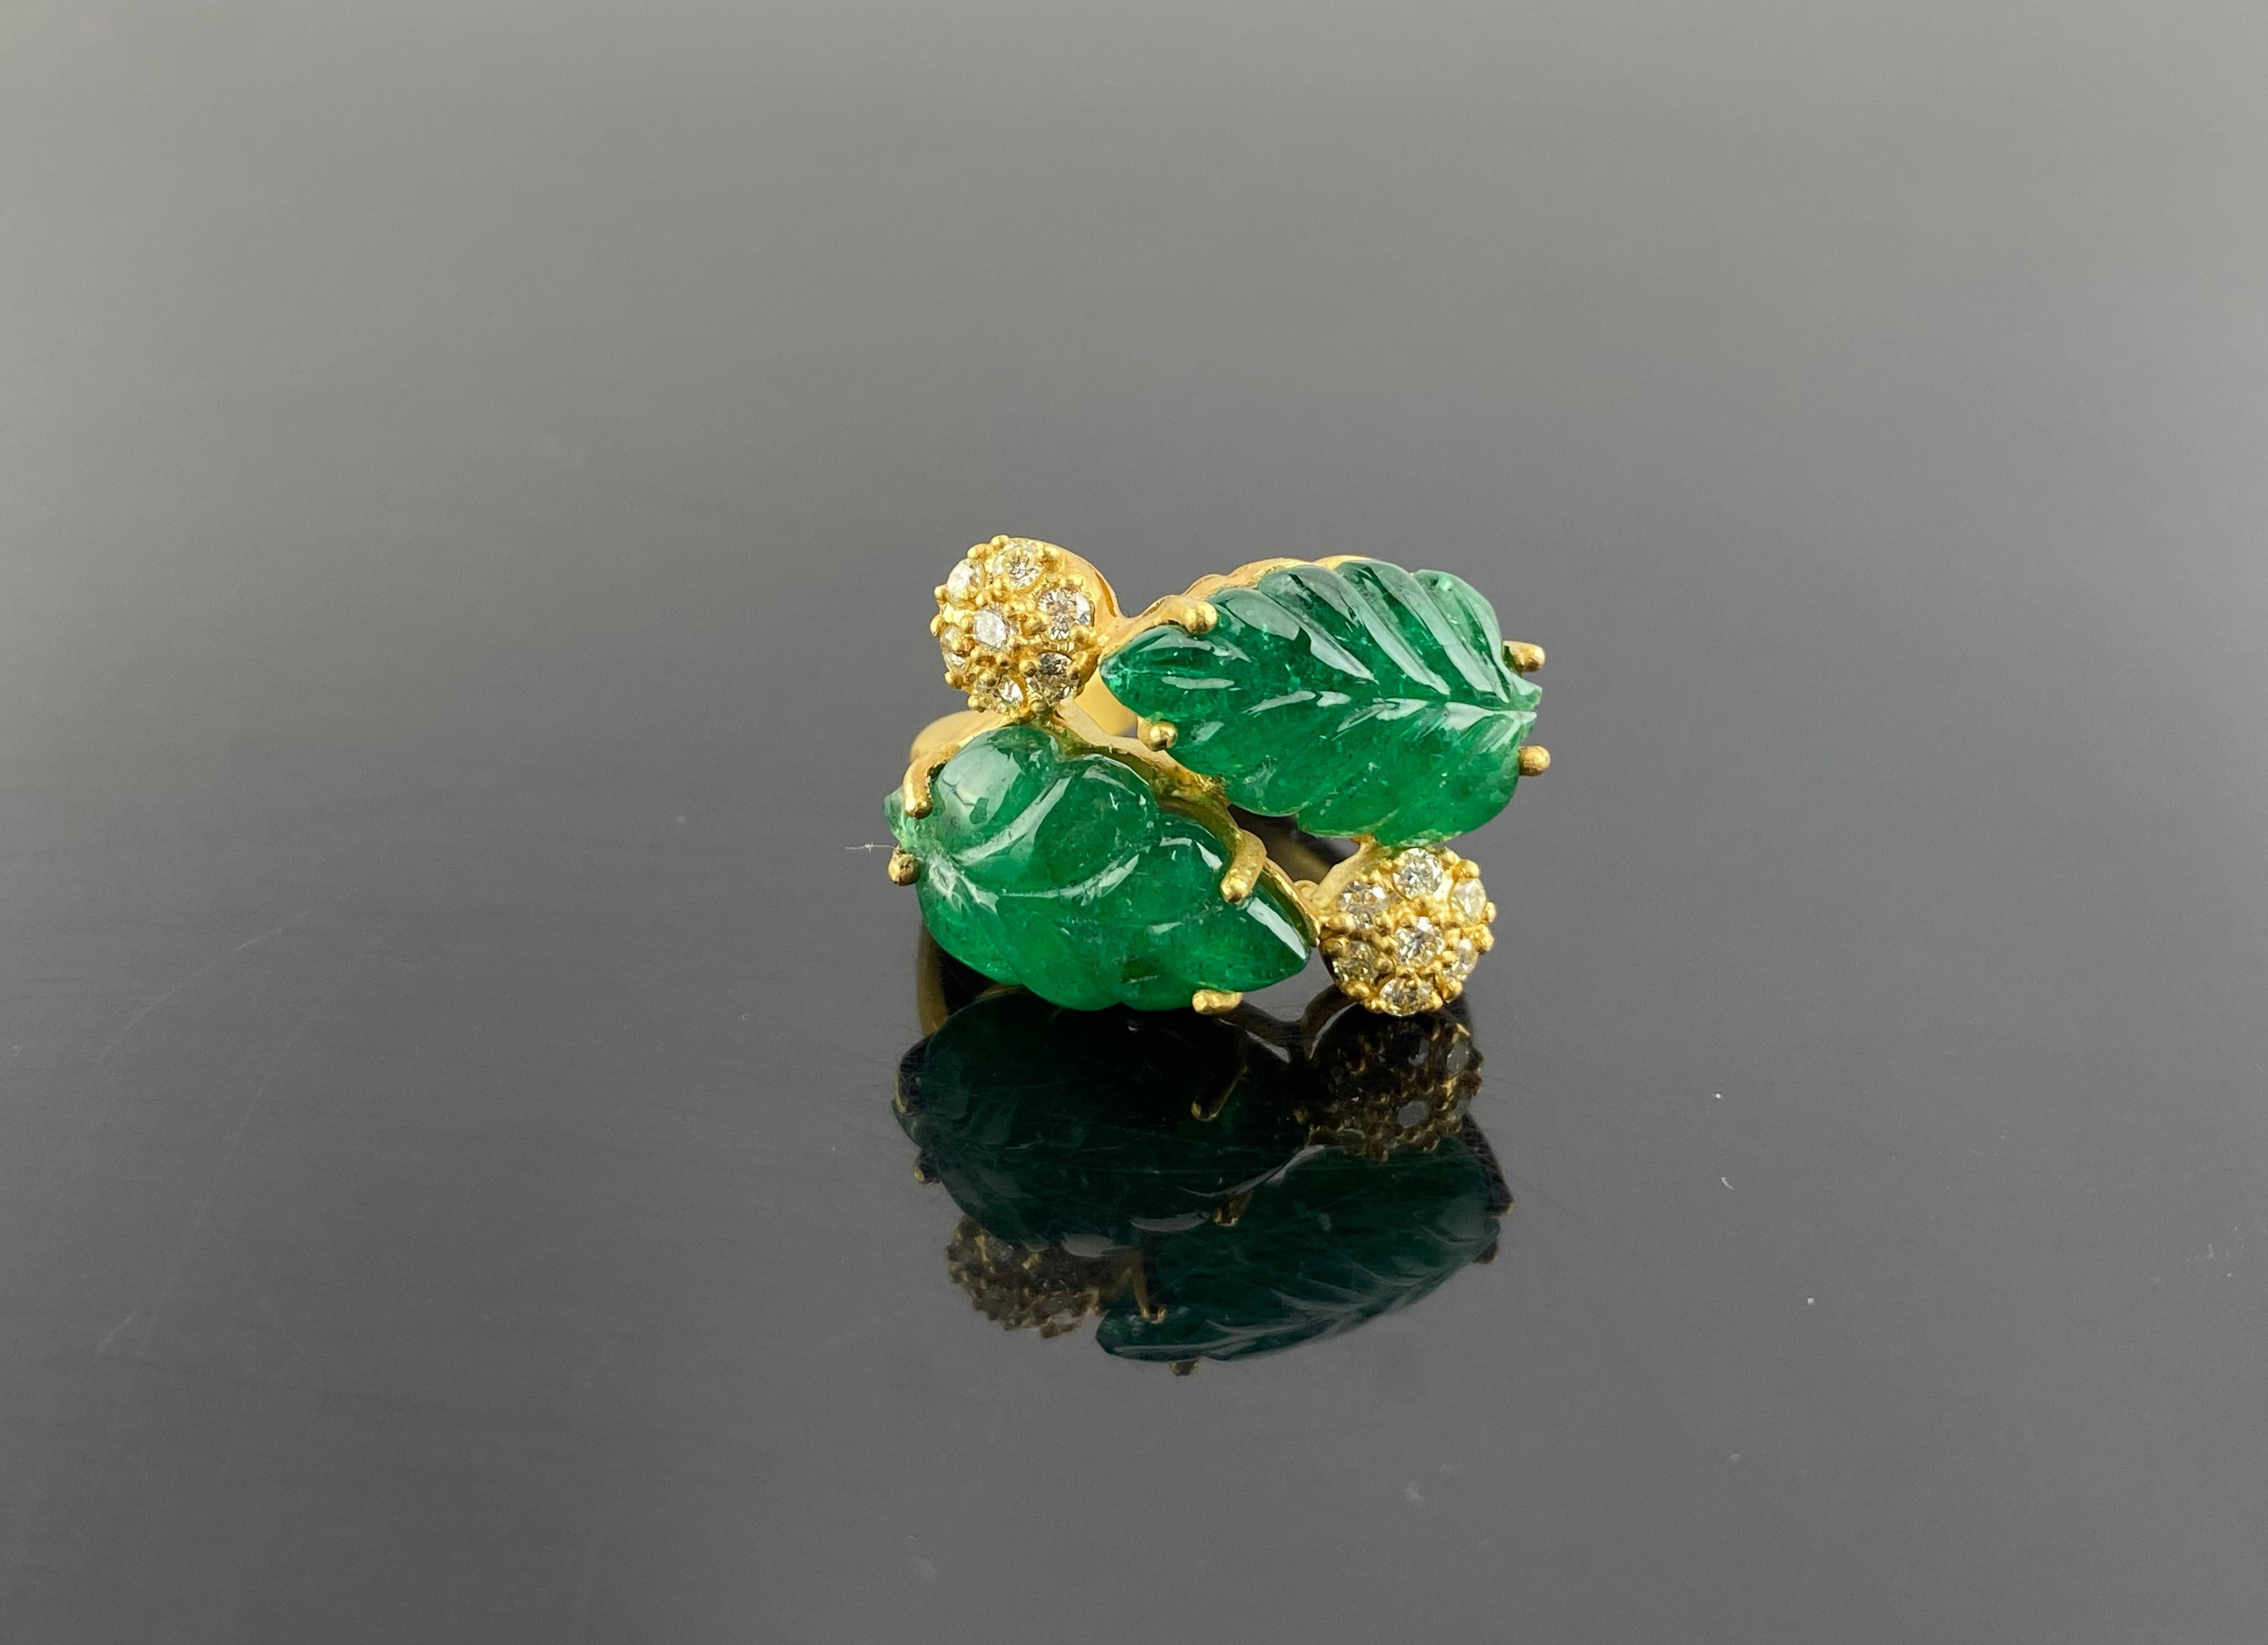  An Emerald Cocktail Ring set in 18K Gold & Diamonds. The weight of the Emerald Carvings carving is 11 carats. The Emerald is completely natural, without any treatment and is of Zambian origin. The Emeralds are hand-carved into leaves in our very